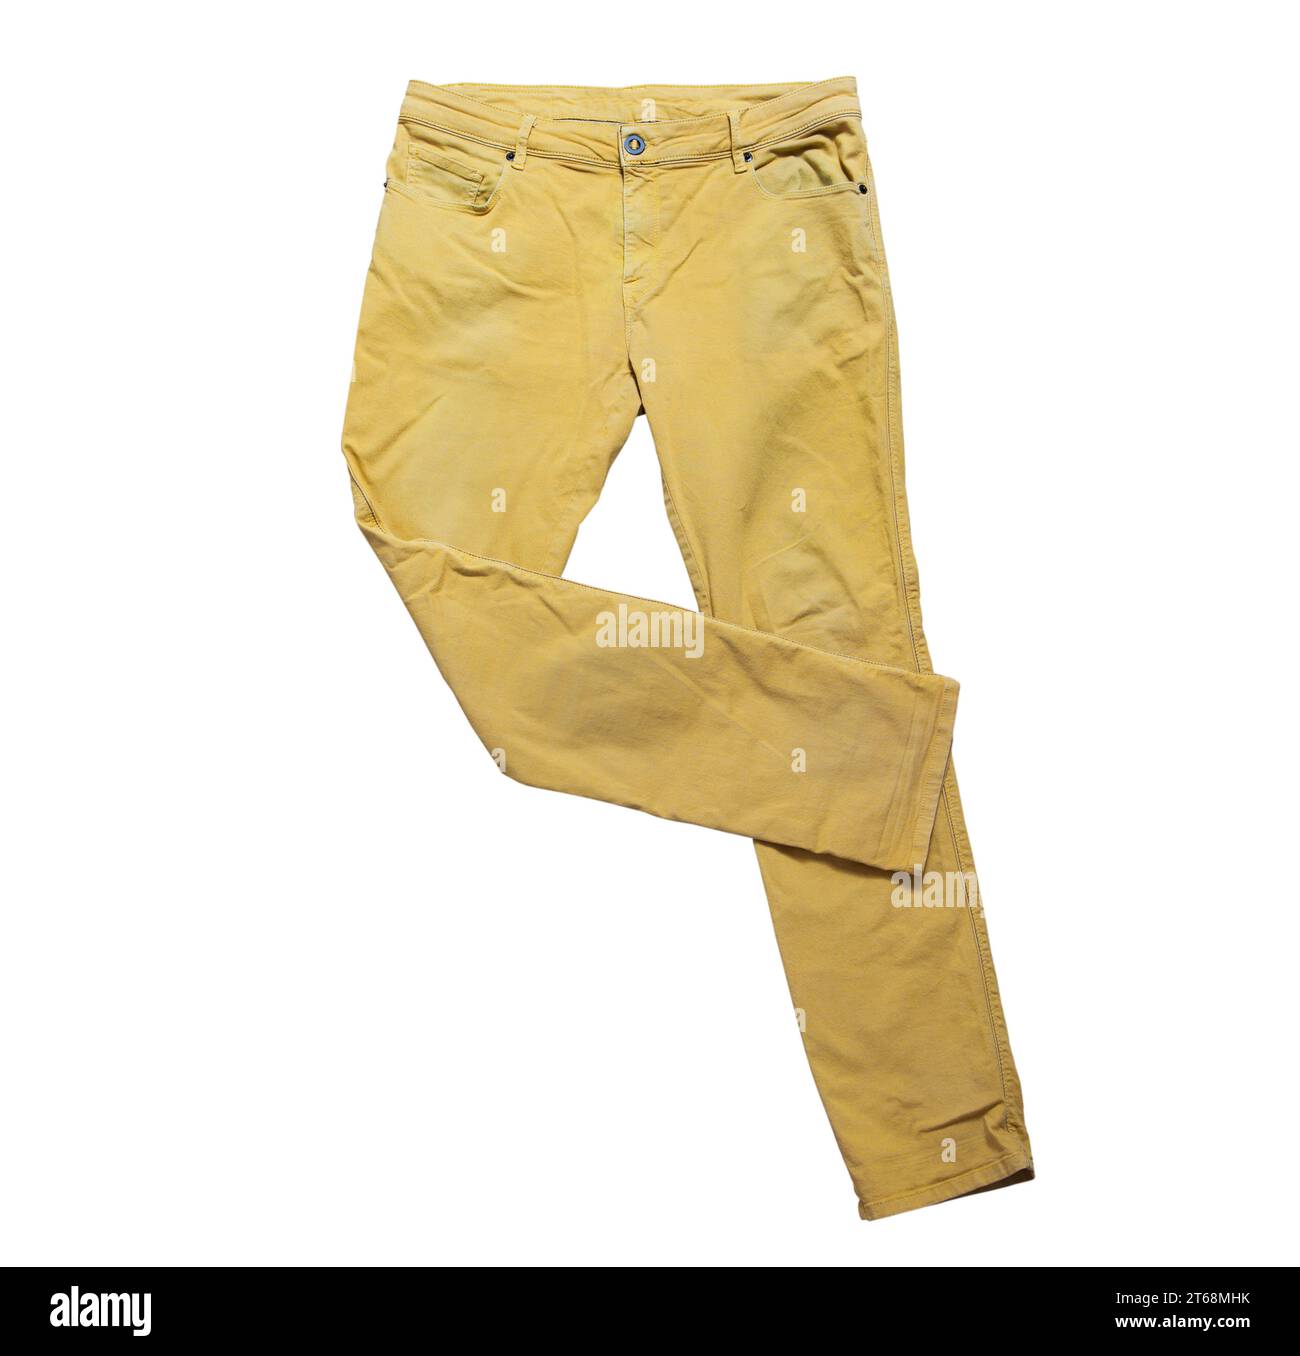 https://c8.alamy.com/comp/2T68MHK/yellow-pants-isolated-yellow-jeans-trousers-pants-skinny-trousers-modern-pockets-yellow-trousers-for-teenagers-isolated-on-white-background-youth-2T68MHK.jpg